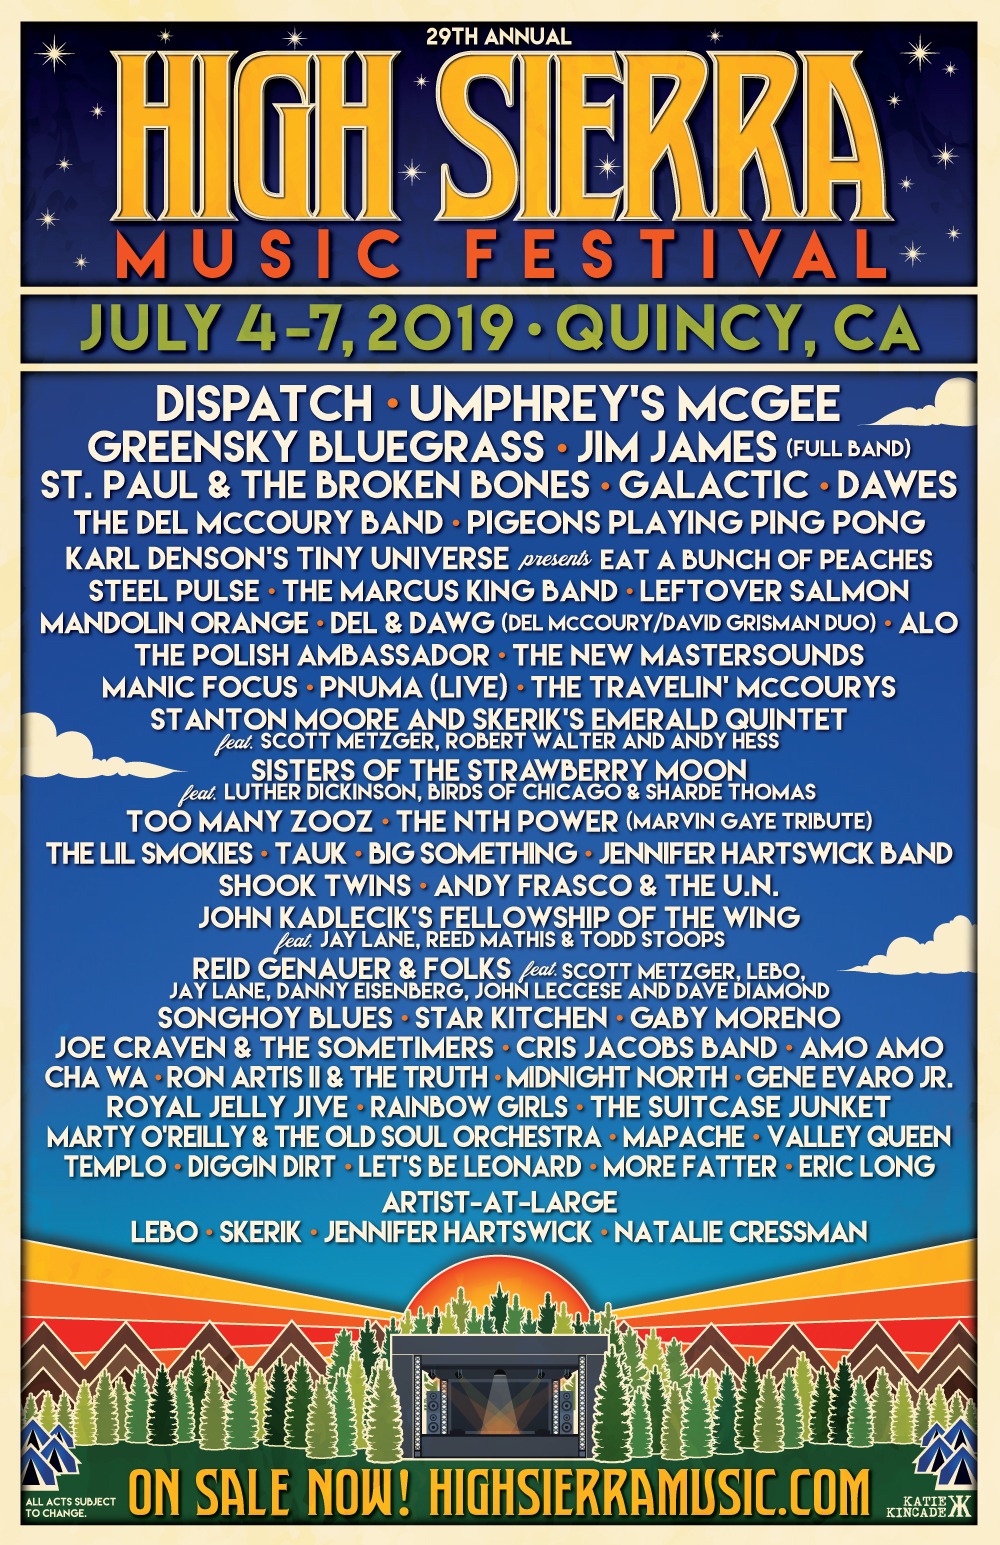 NEW SHOW: JULY 4-7 | QUINCY, CA